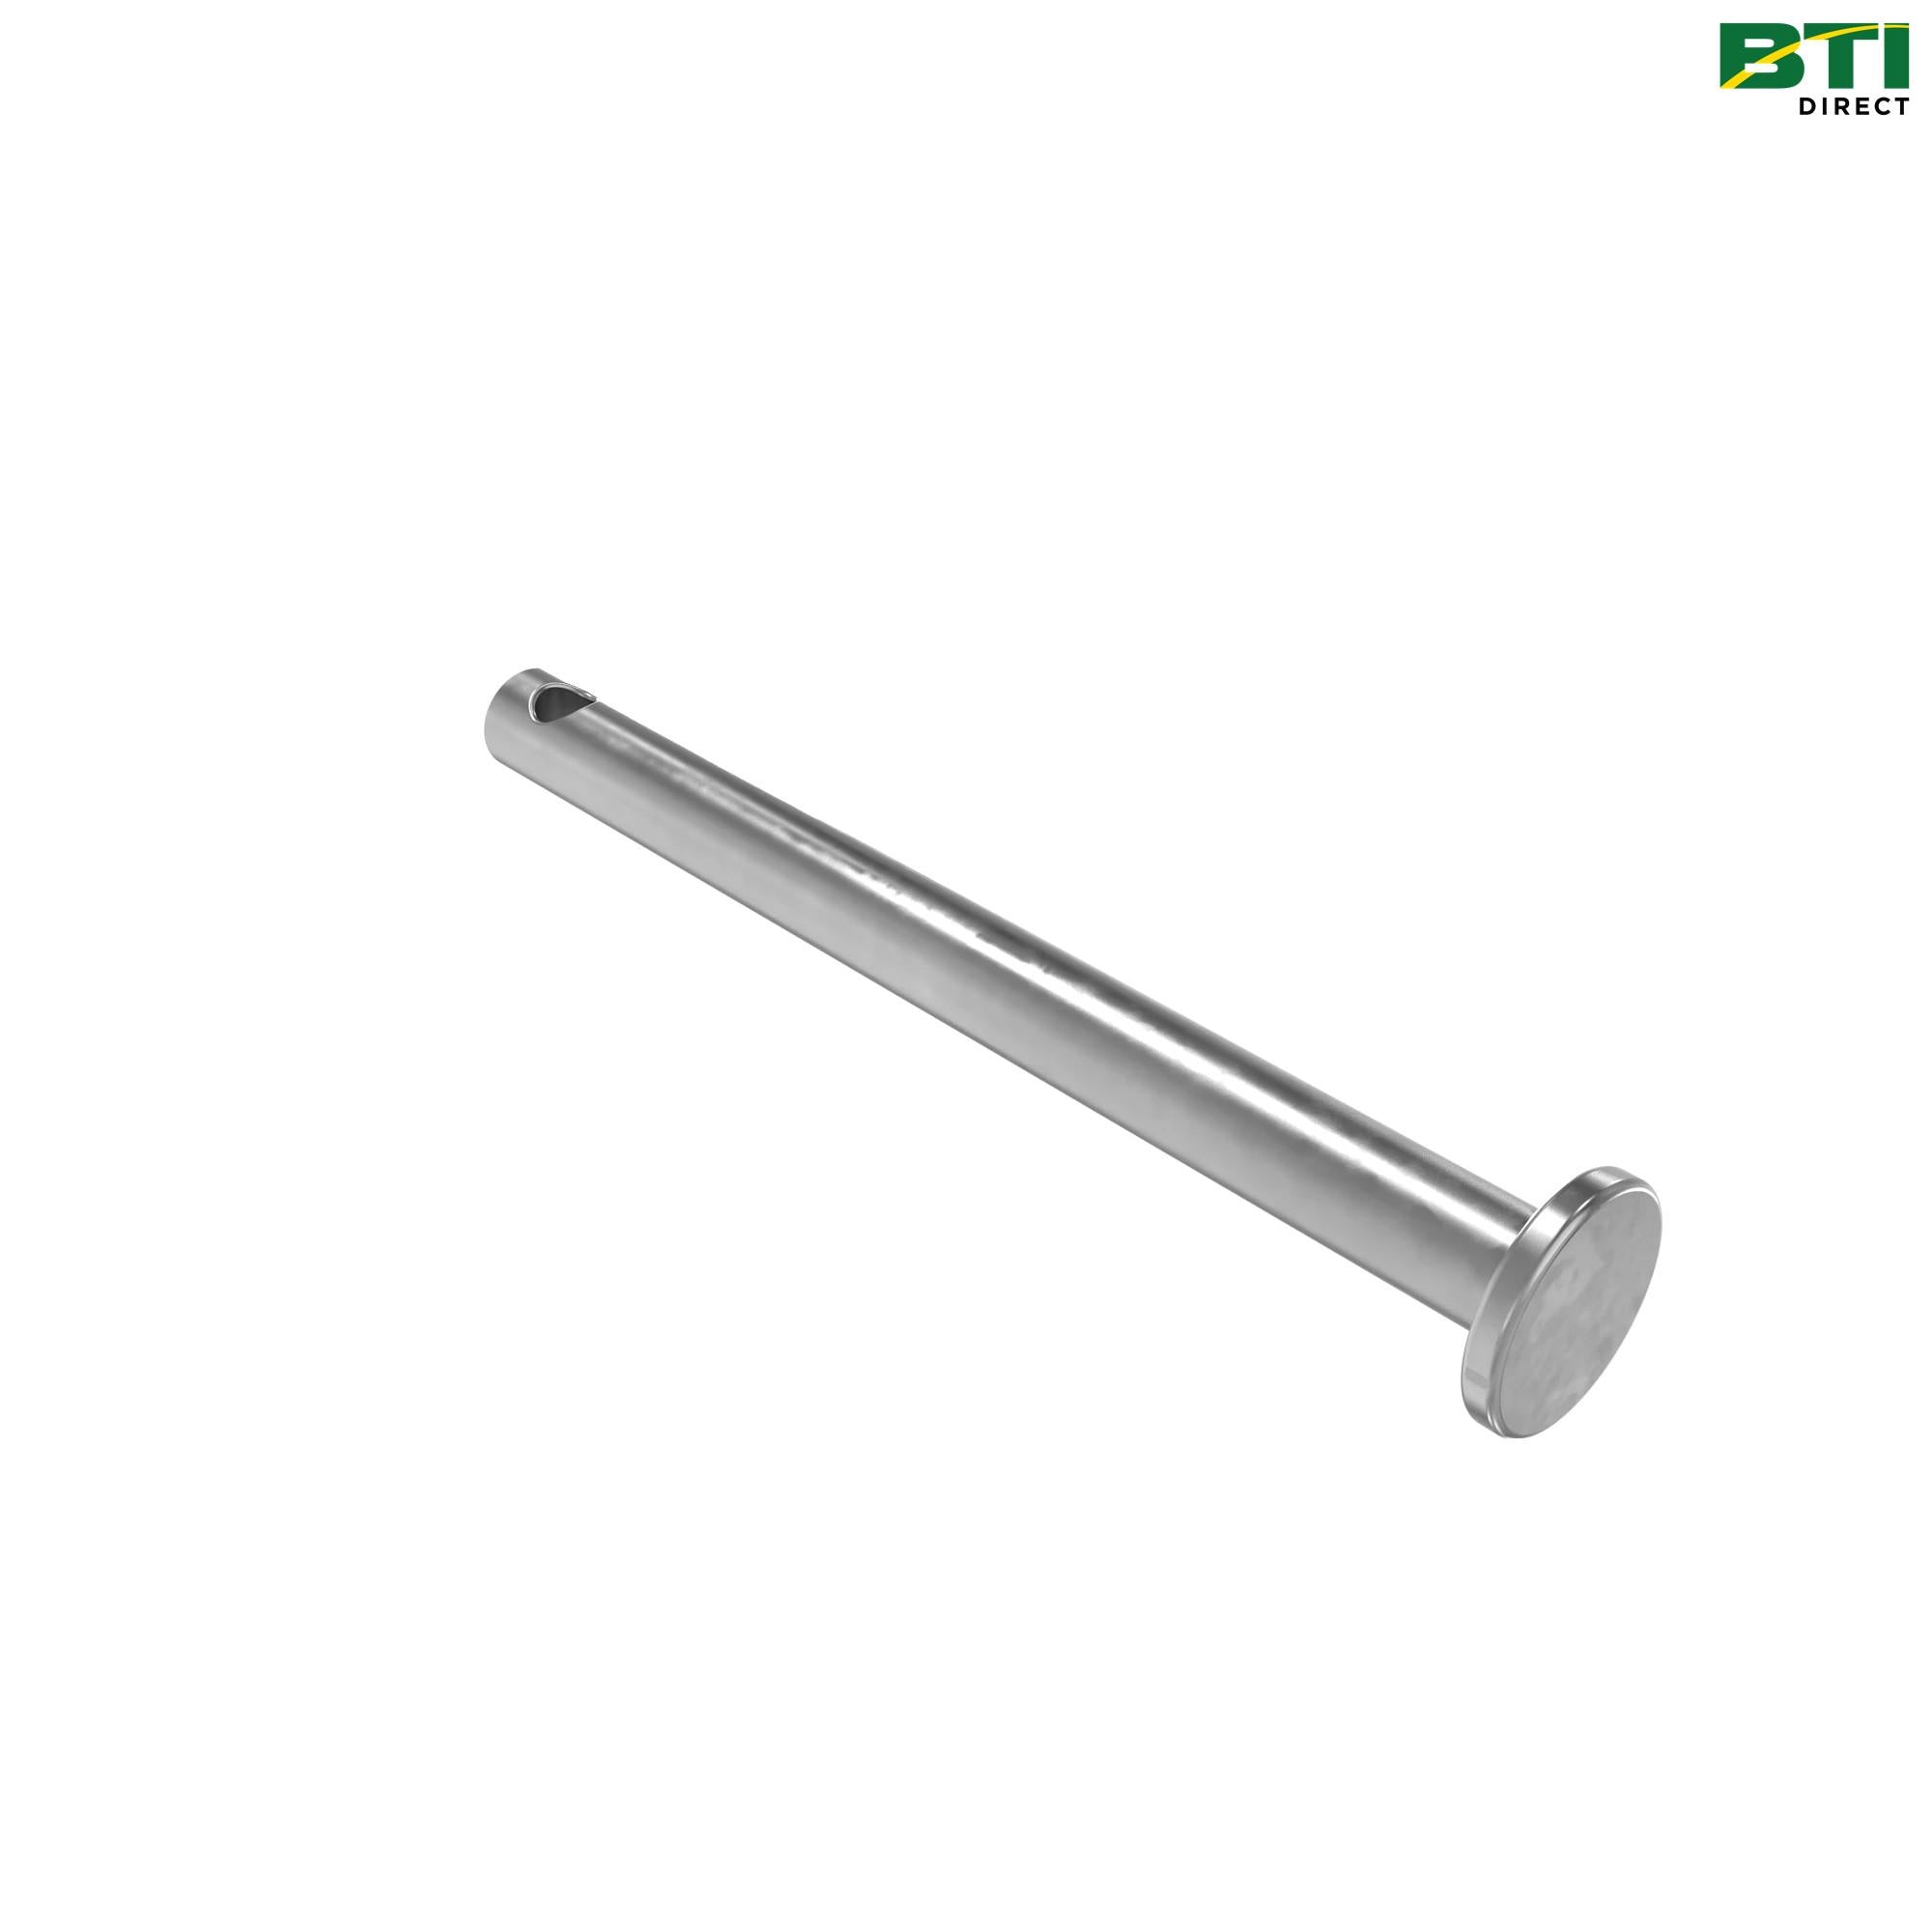 A49724: Steel Flat and Clevis Head Headed Pin